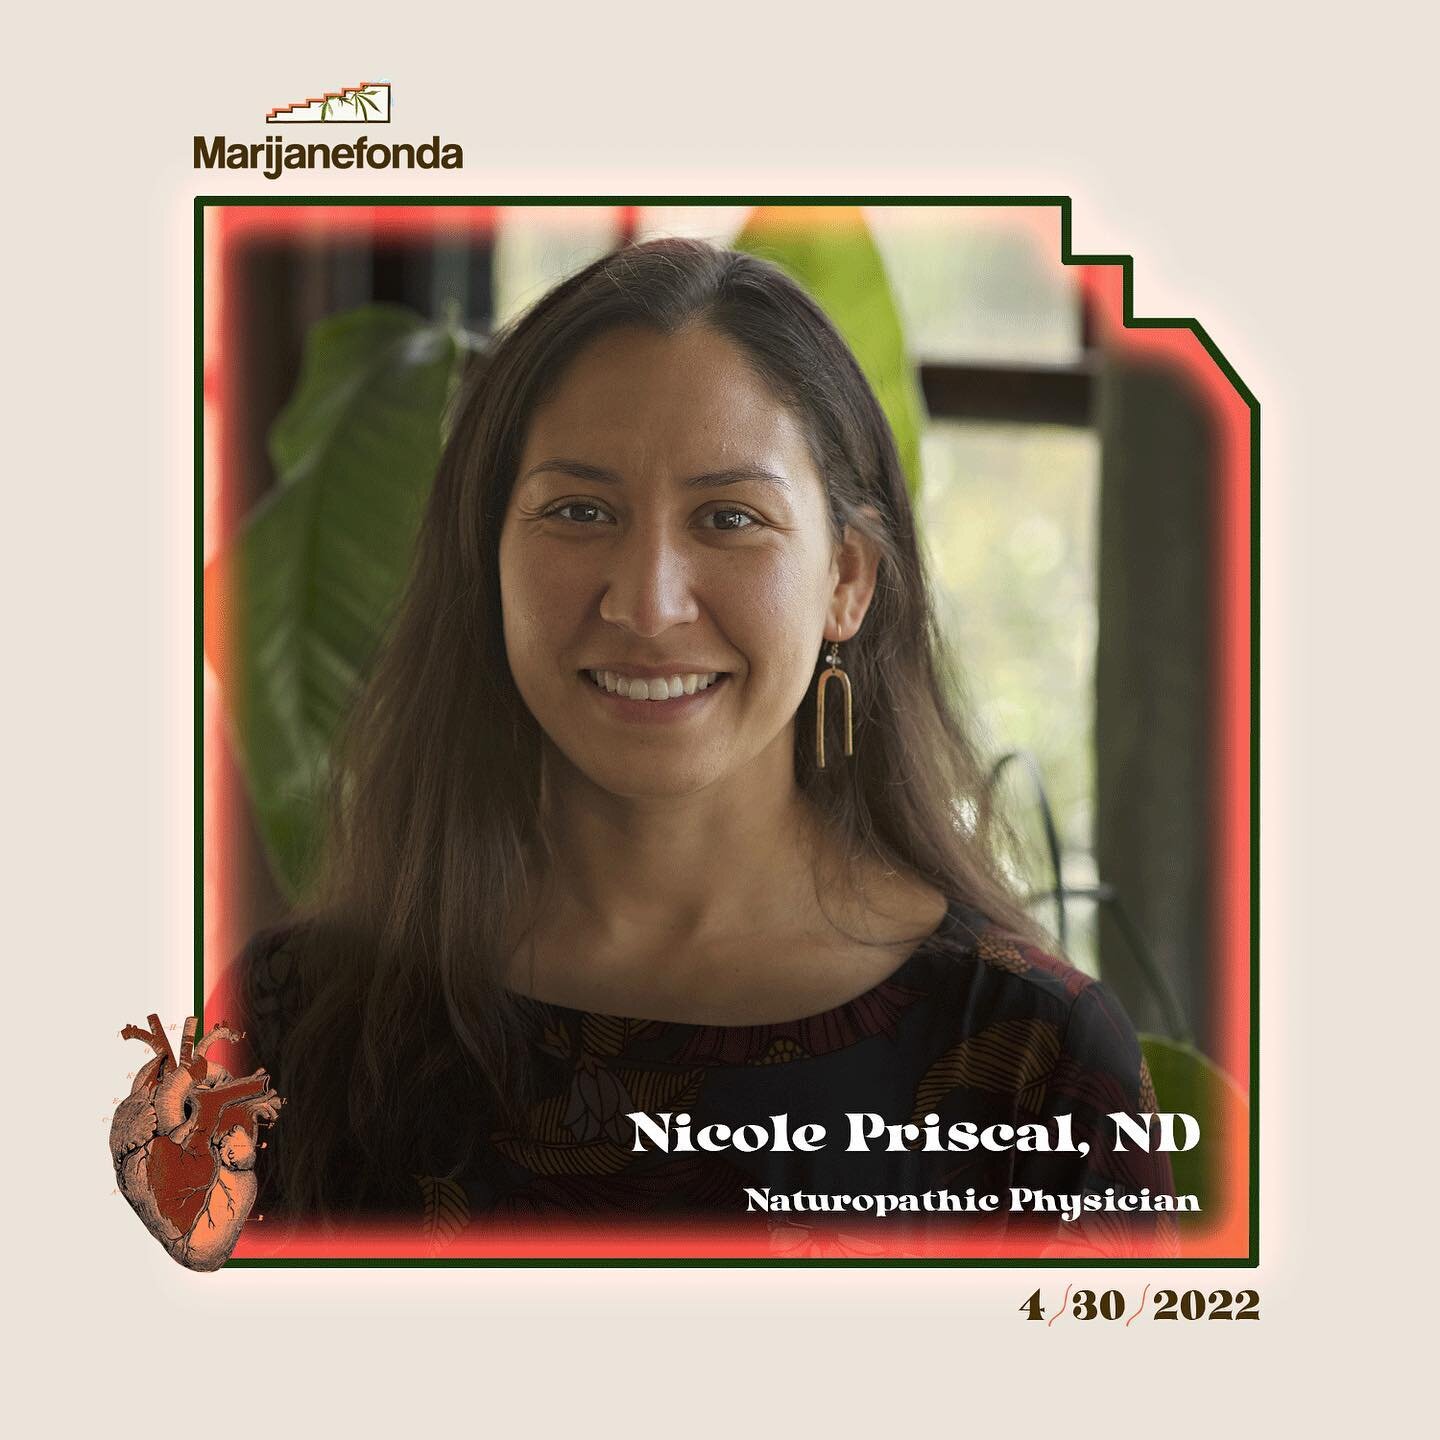 Naturopathic Physician, @dr.nicolepriscal, specializes in women&rsquo;s health as well as providing integrative care for people with complex medical issues and on 4/30/22 we're so happy to have her leading a dynamic breathwork + pelvic floor session!